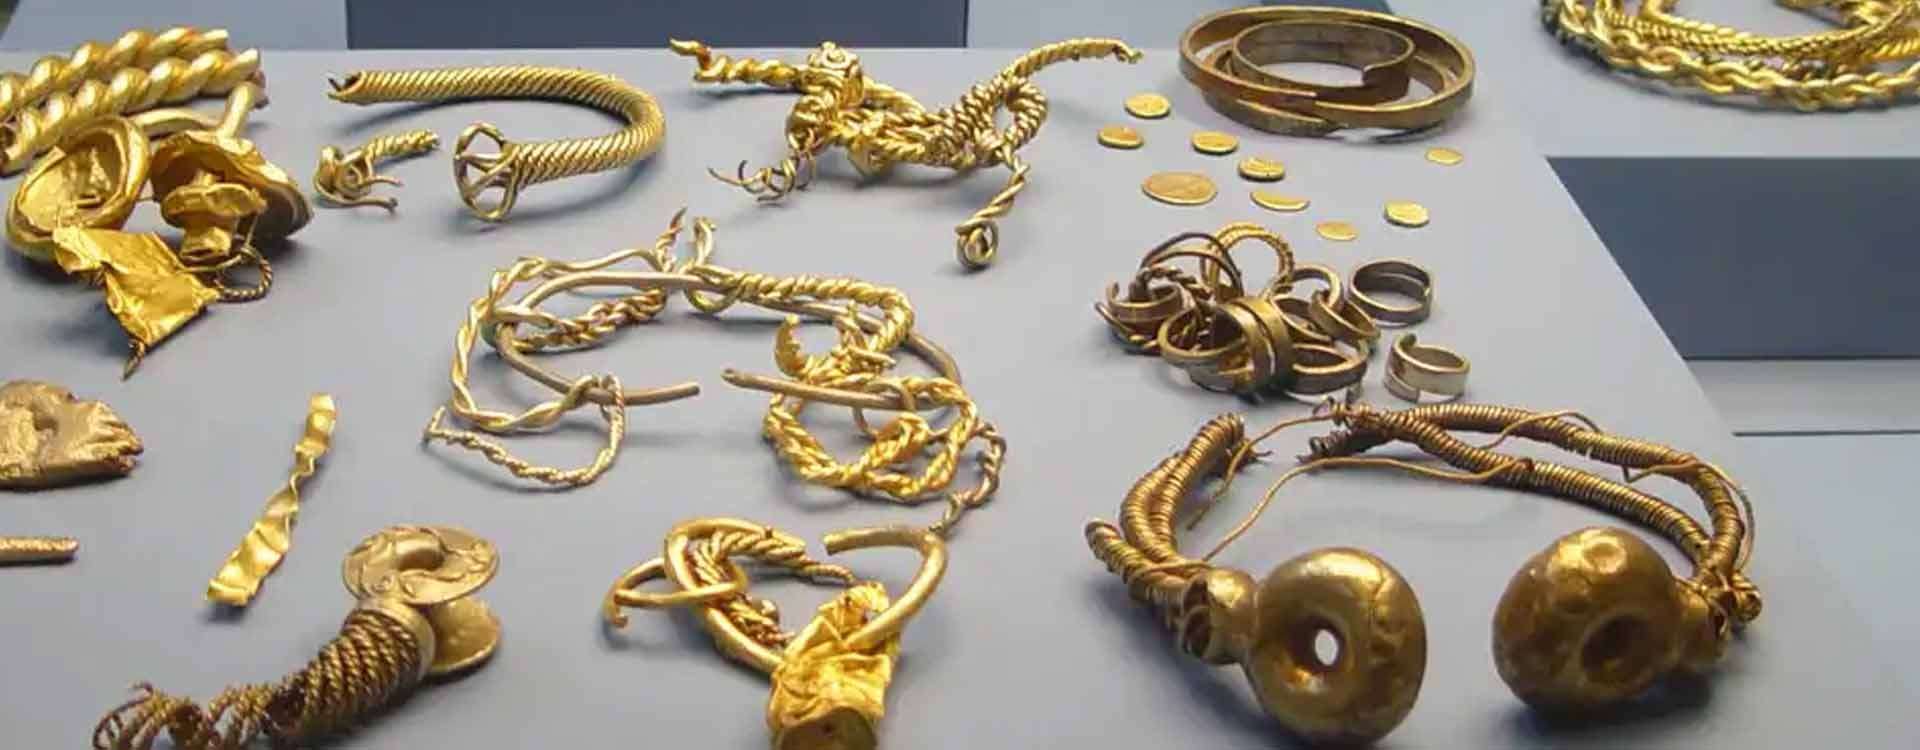 Unearthing the Mysteries: Archaeological Finds of Celtic Jewelry